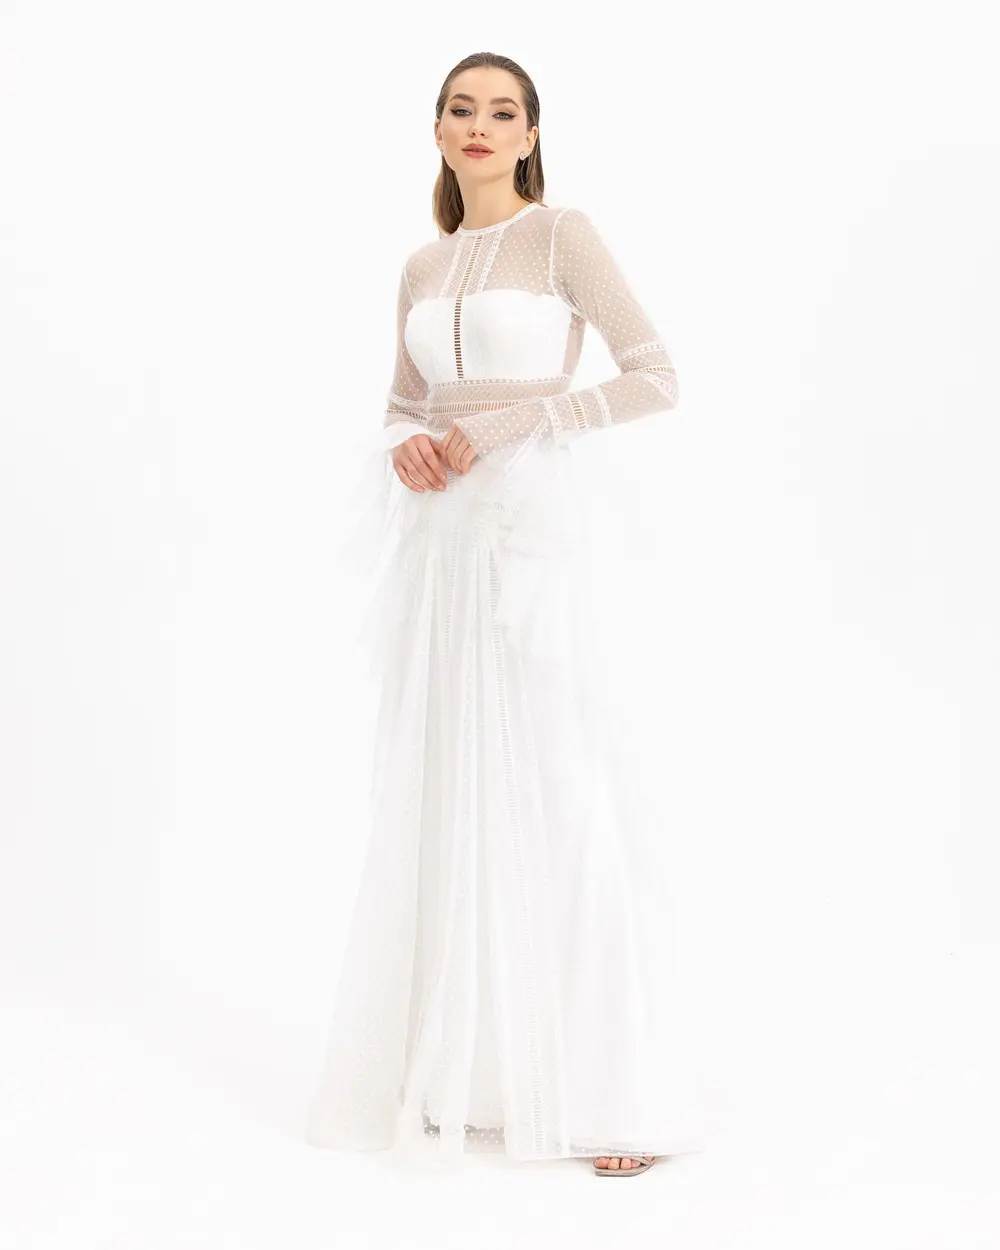 FISH FORM MAXI SIZE TULLE EVENING DRESS